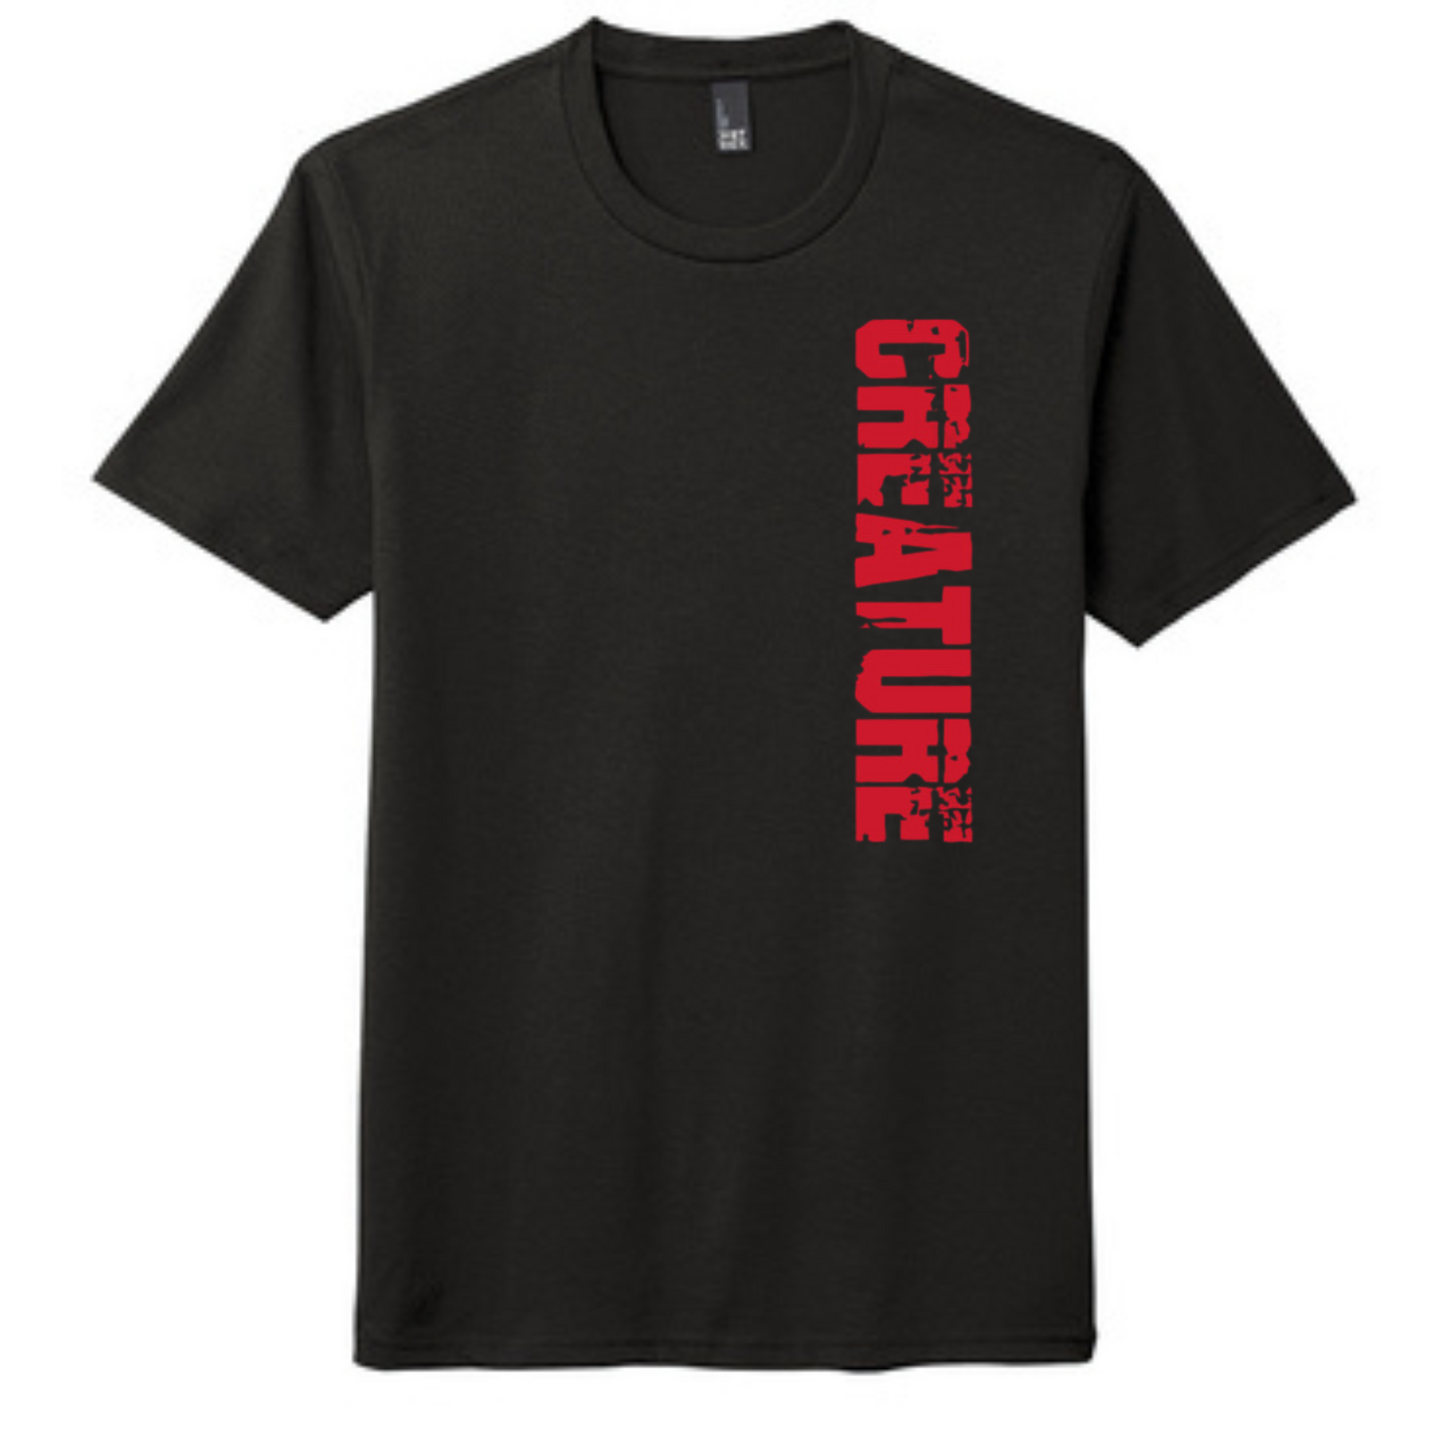 Red Creature T-Shirt